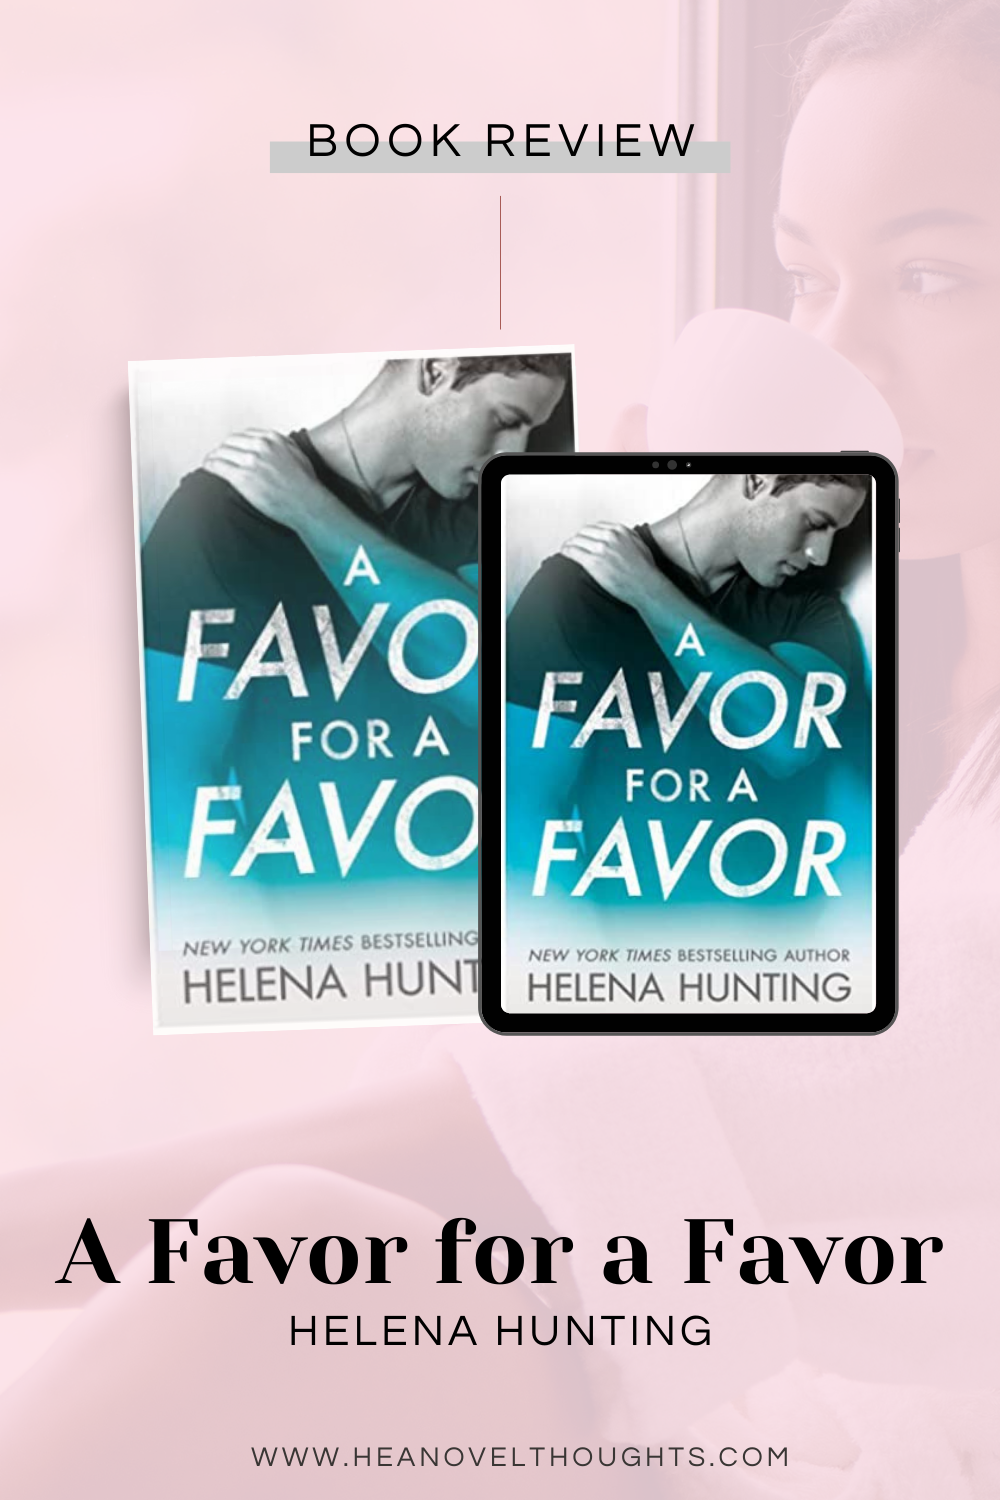 A Favor for A Favor by Helena Hunting